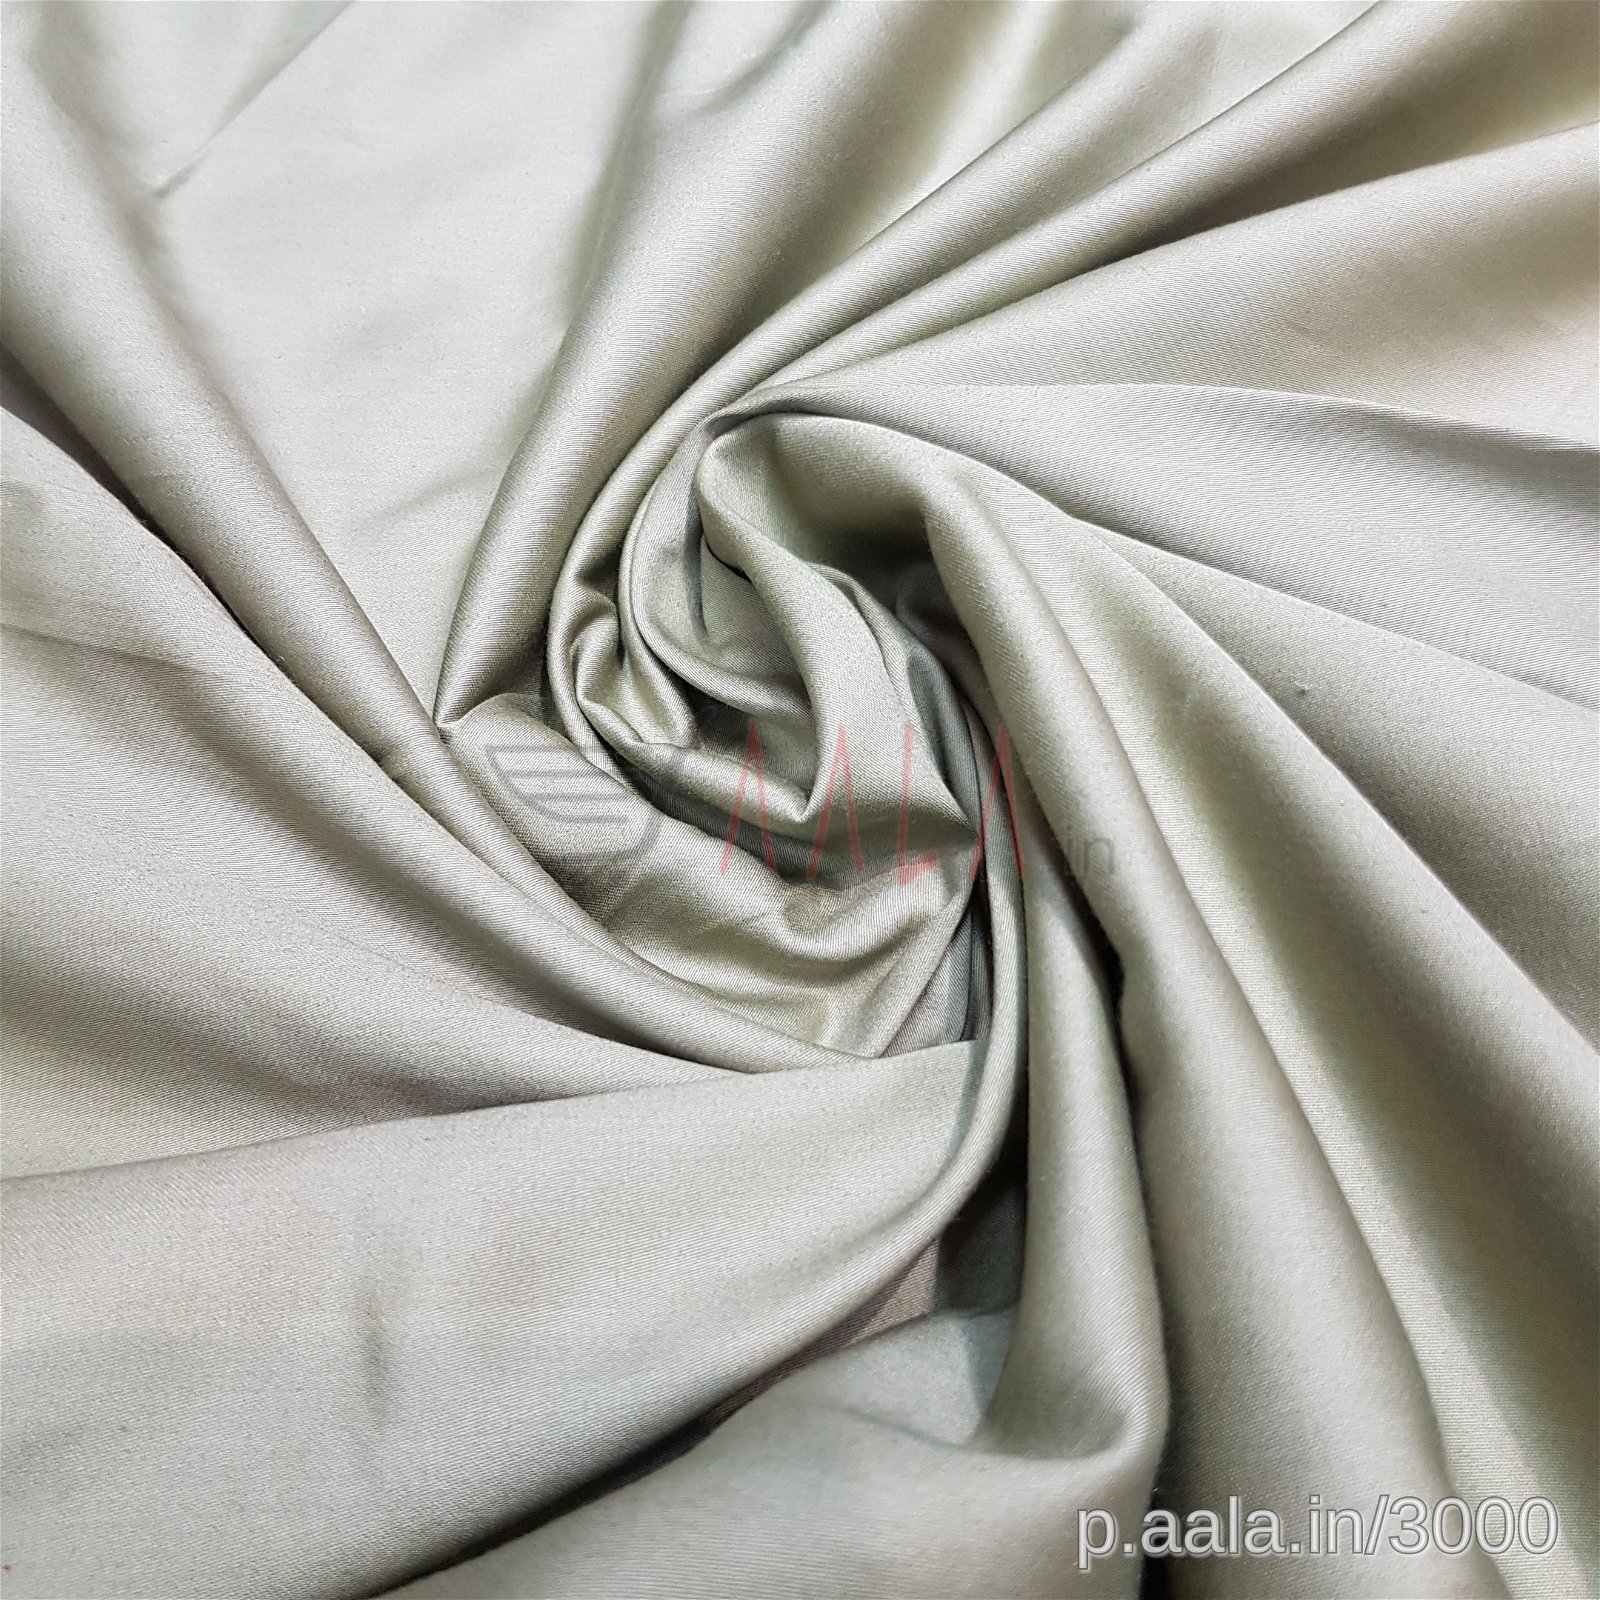 Satin Cotton 44 Inches Dyed Per Metre #3000